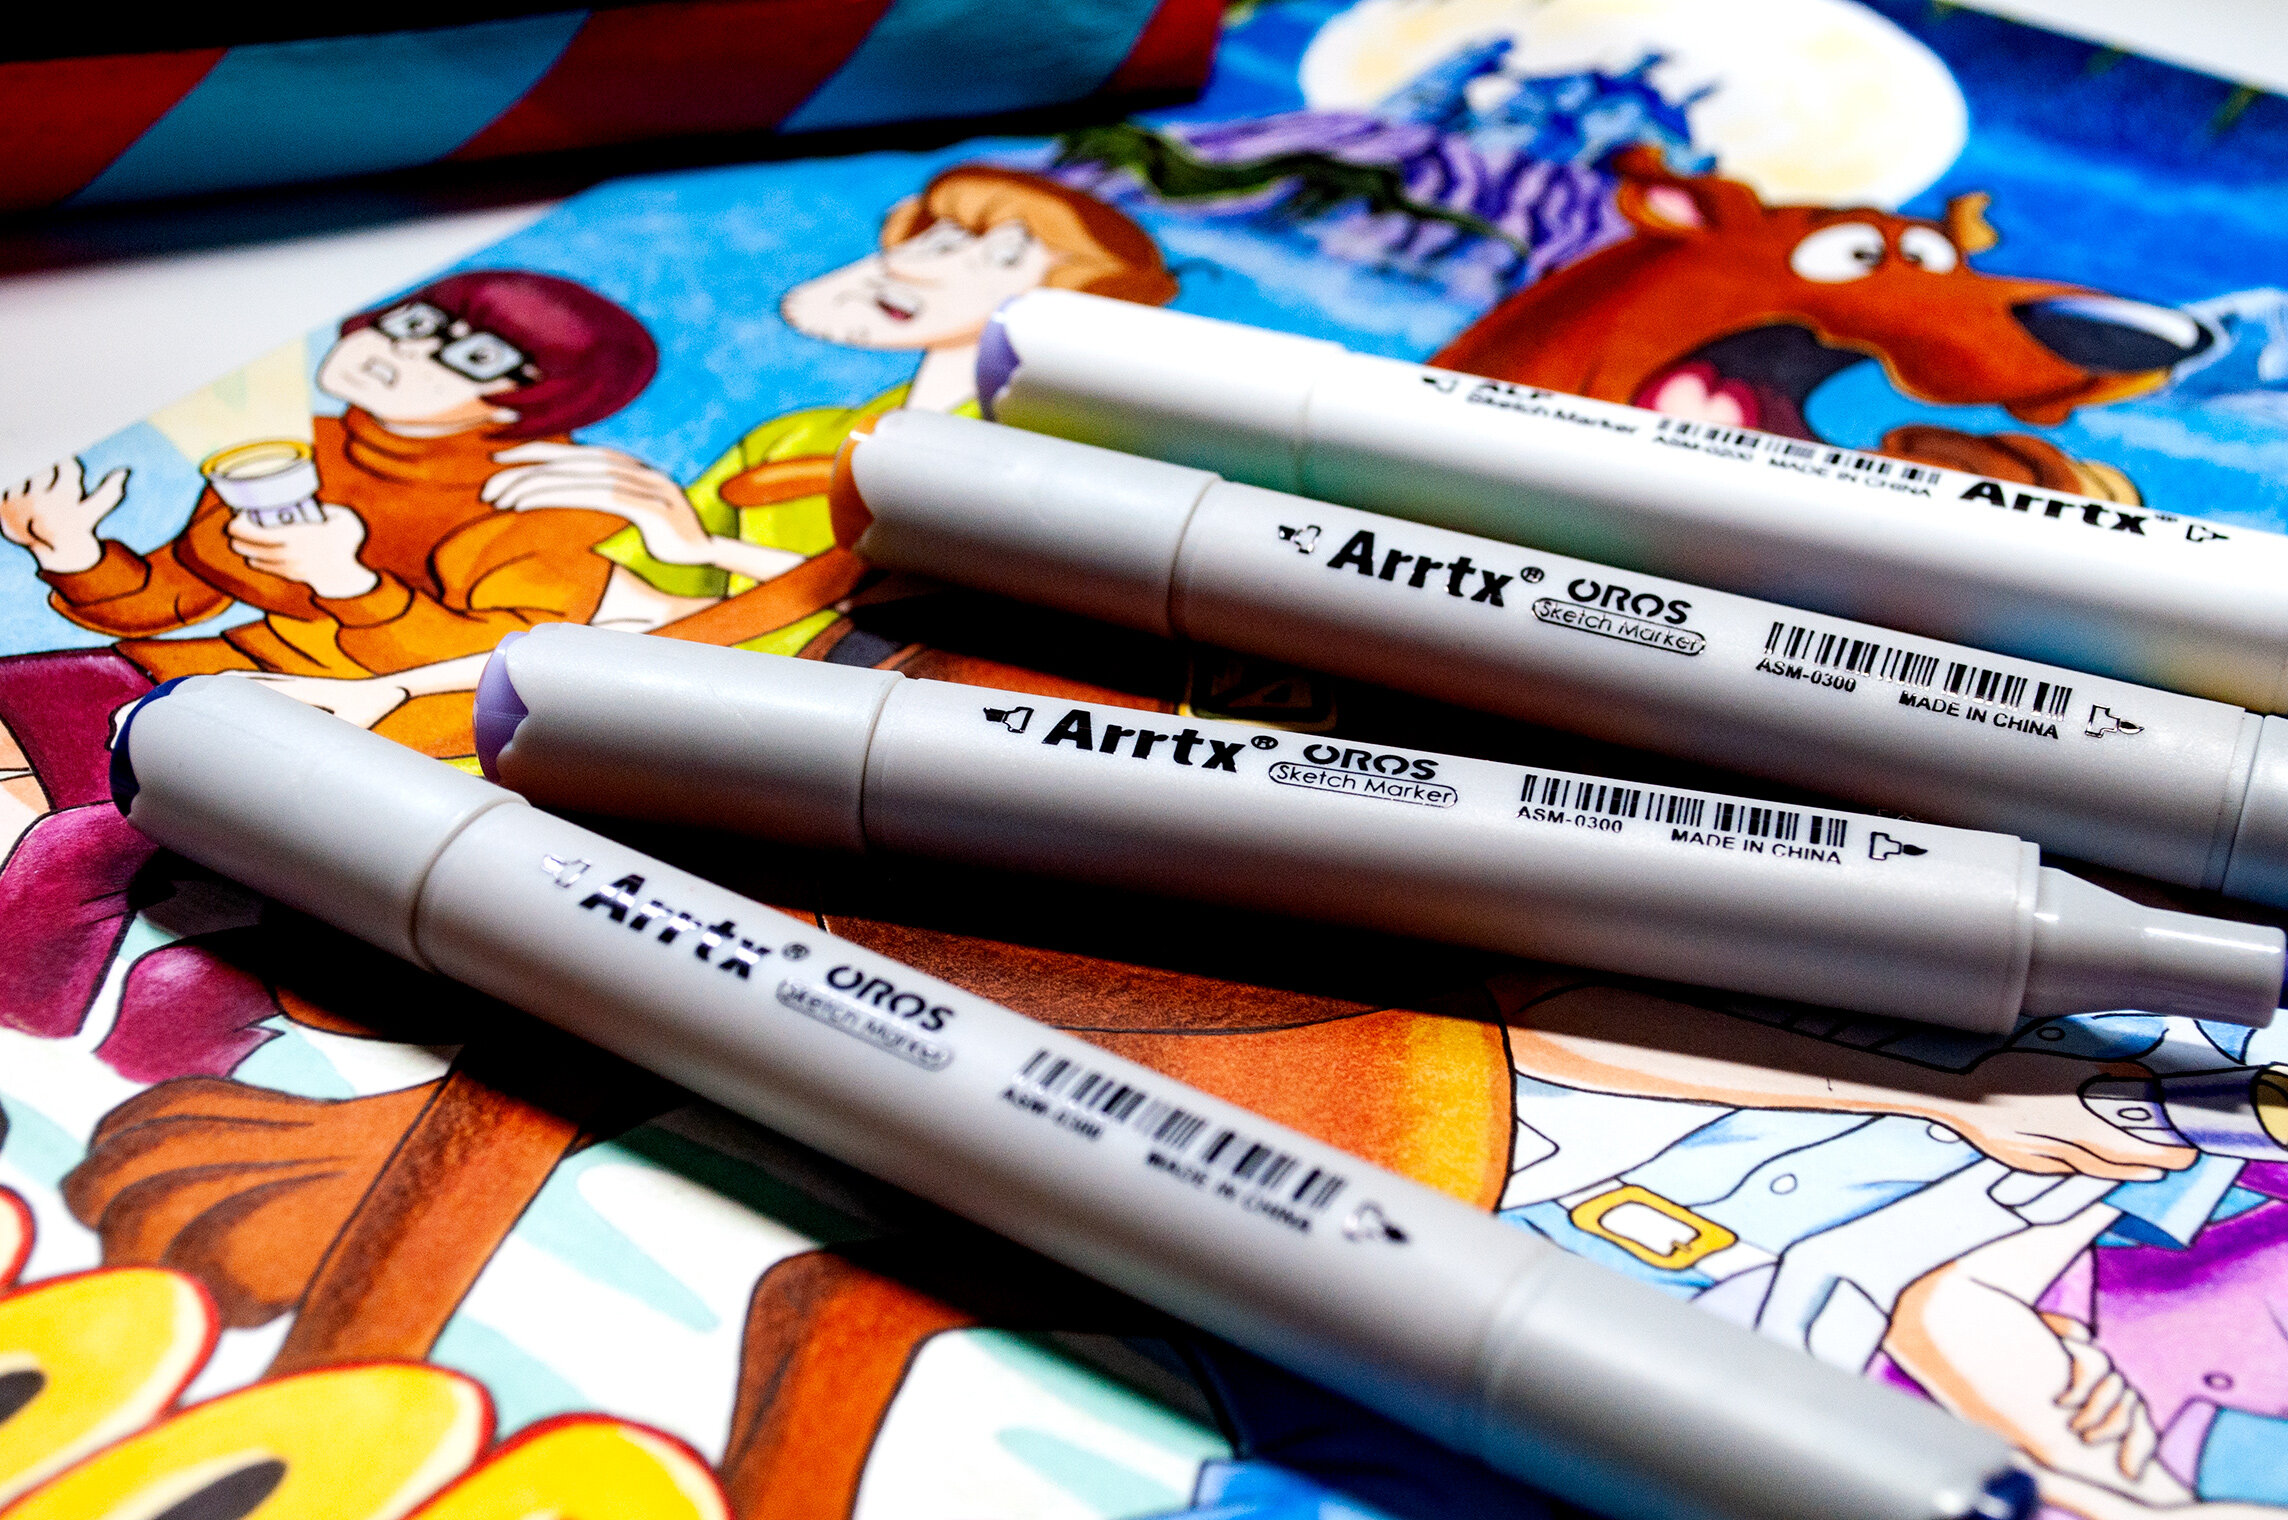 Arrtx Markers Vs Copic Ciao Markers - Marker Review 